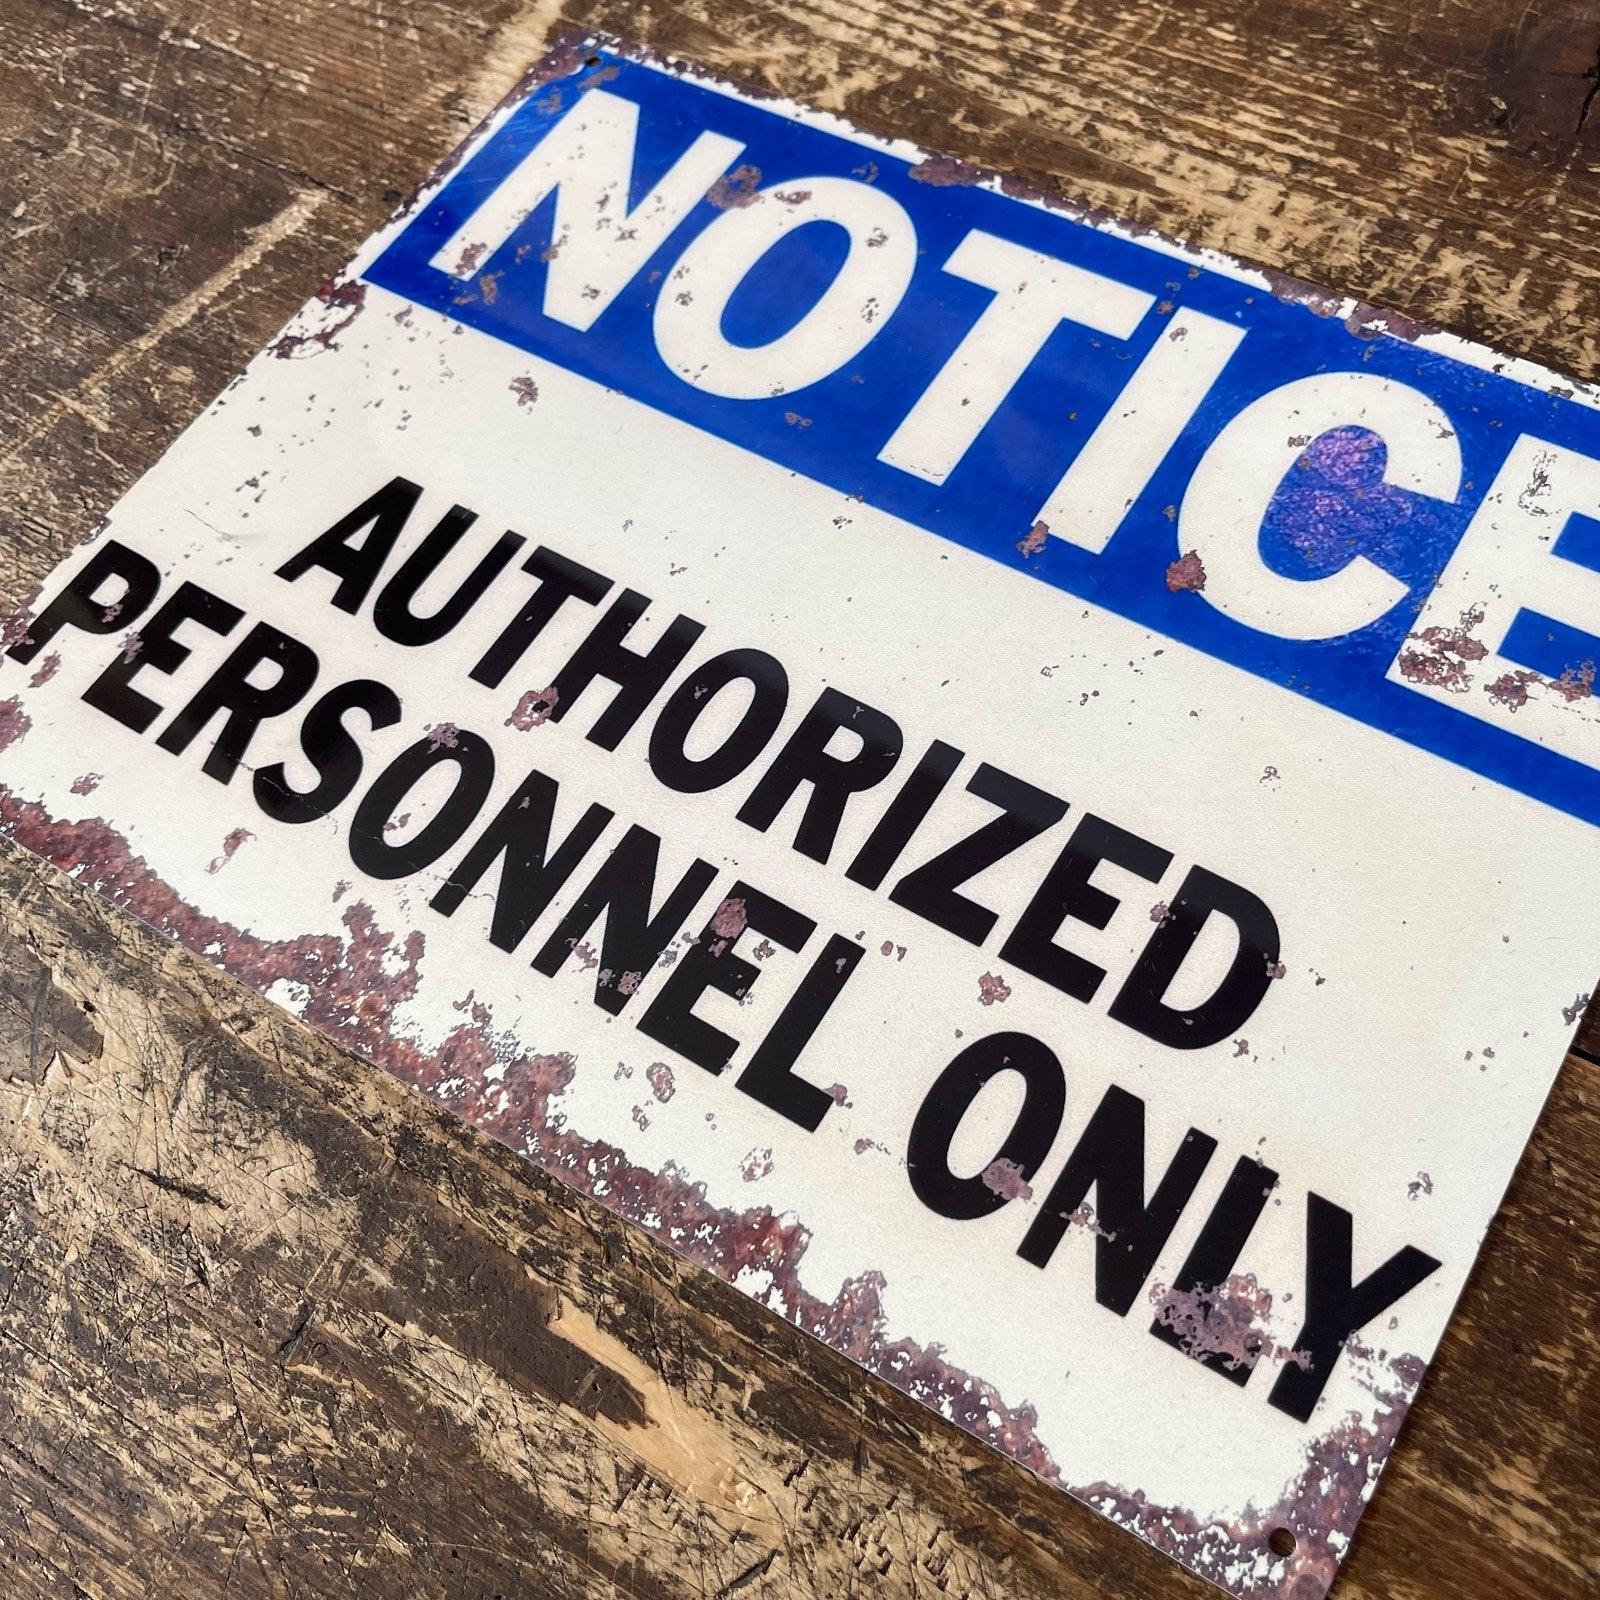 Vintage Metal Sign - Notice Authorized Personnel Only-Signs & Rules